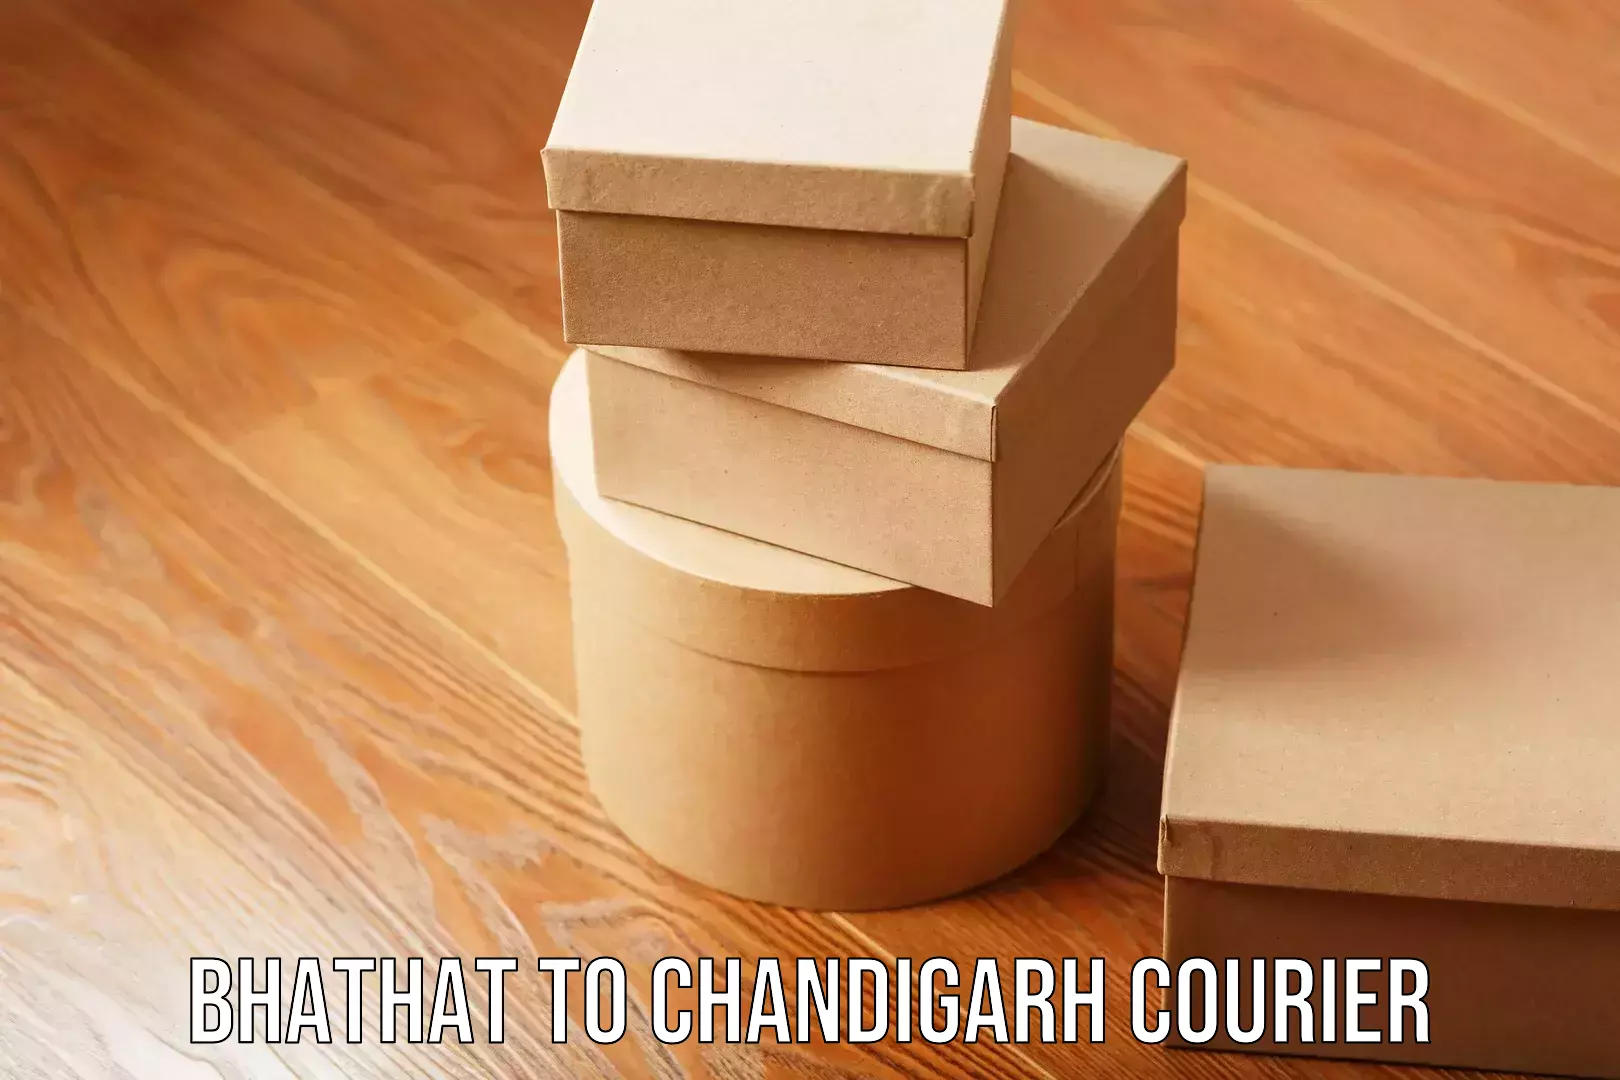 Enhanced tracking features Bhathat to Chandigarh